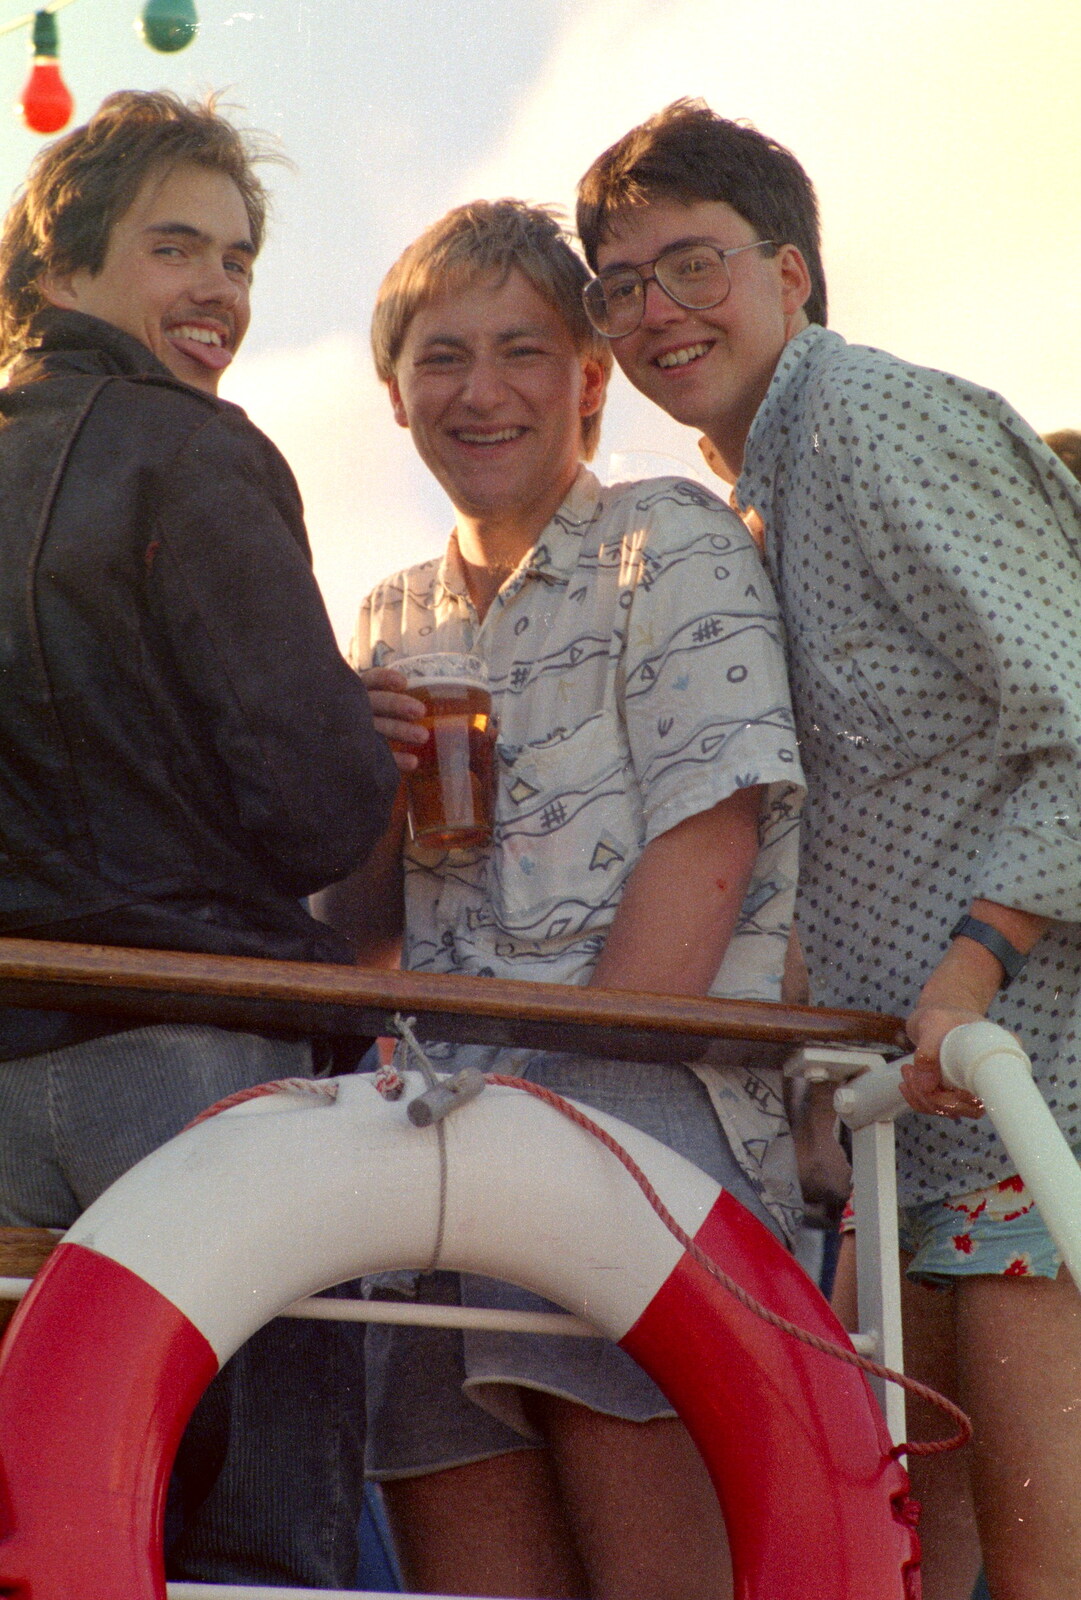 Unknown, Nick Aarons and Tim Collins from Uni: A Student Booze Cruise, Plymouth Sound, Devon - 2nd May 1986